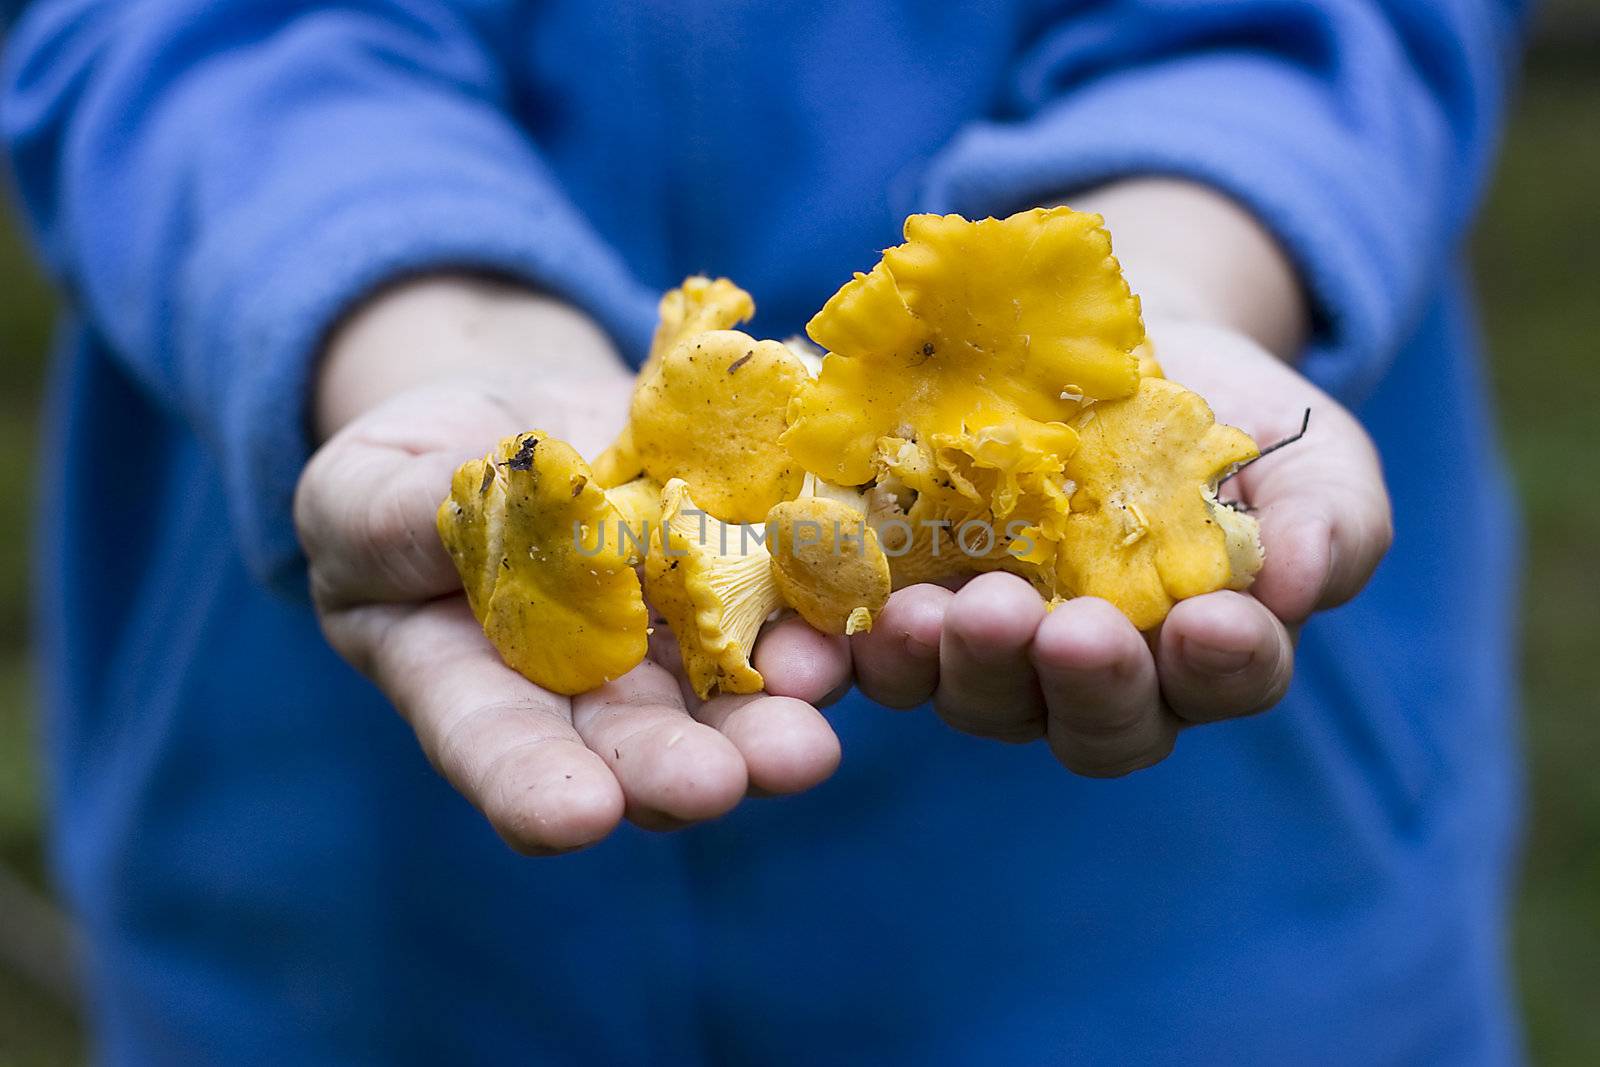 Just picked yellow yellow chanterelles held out in hands. Soft focus